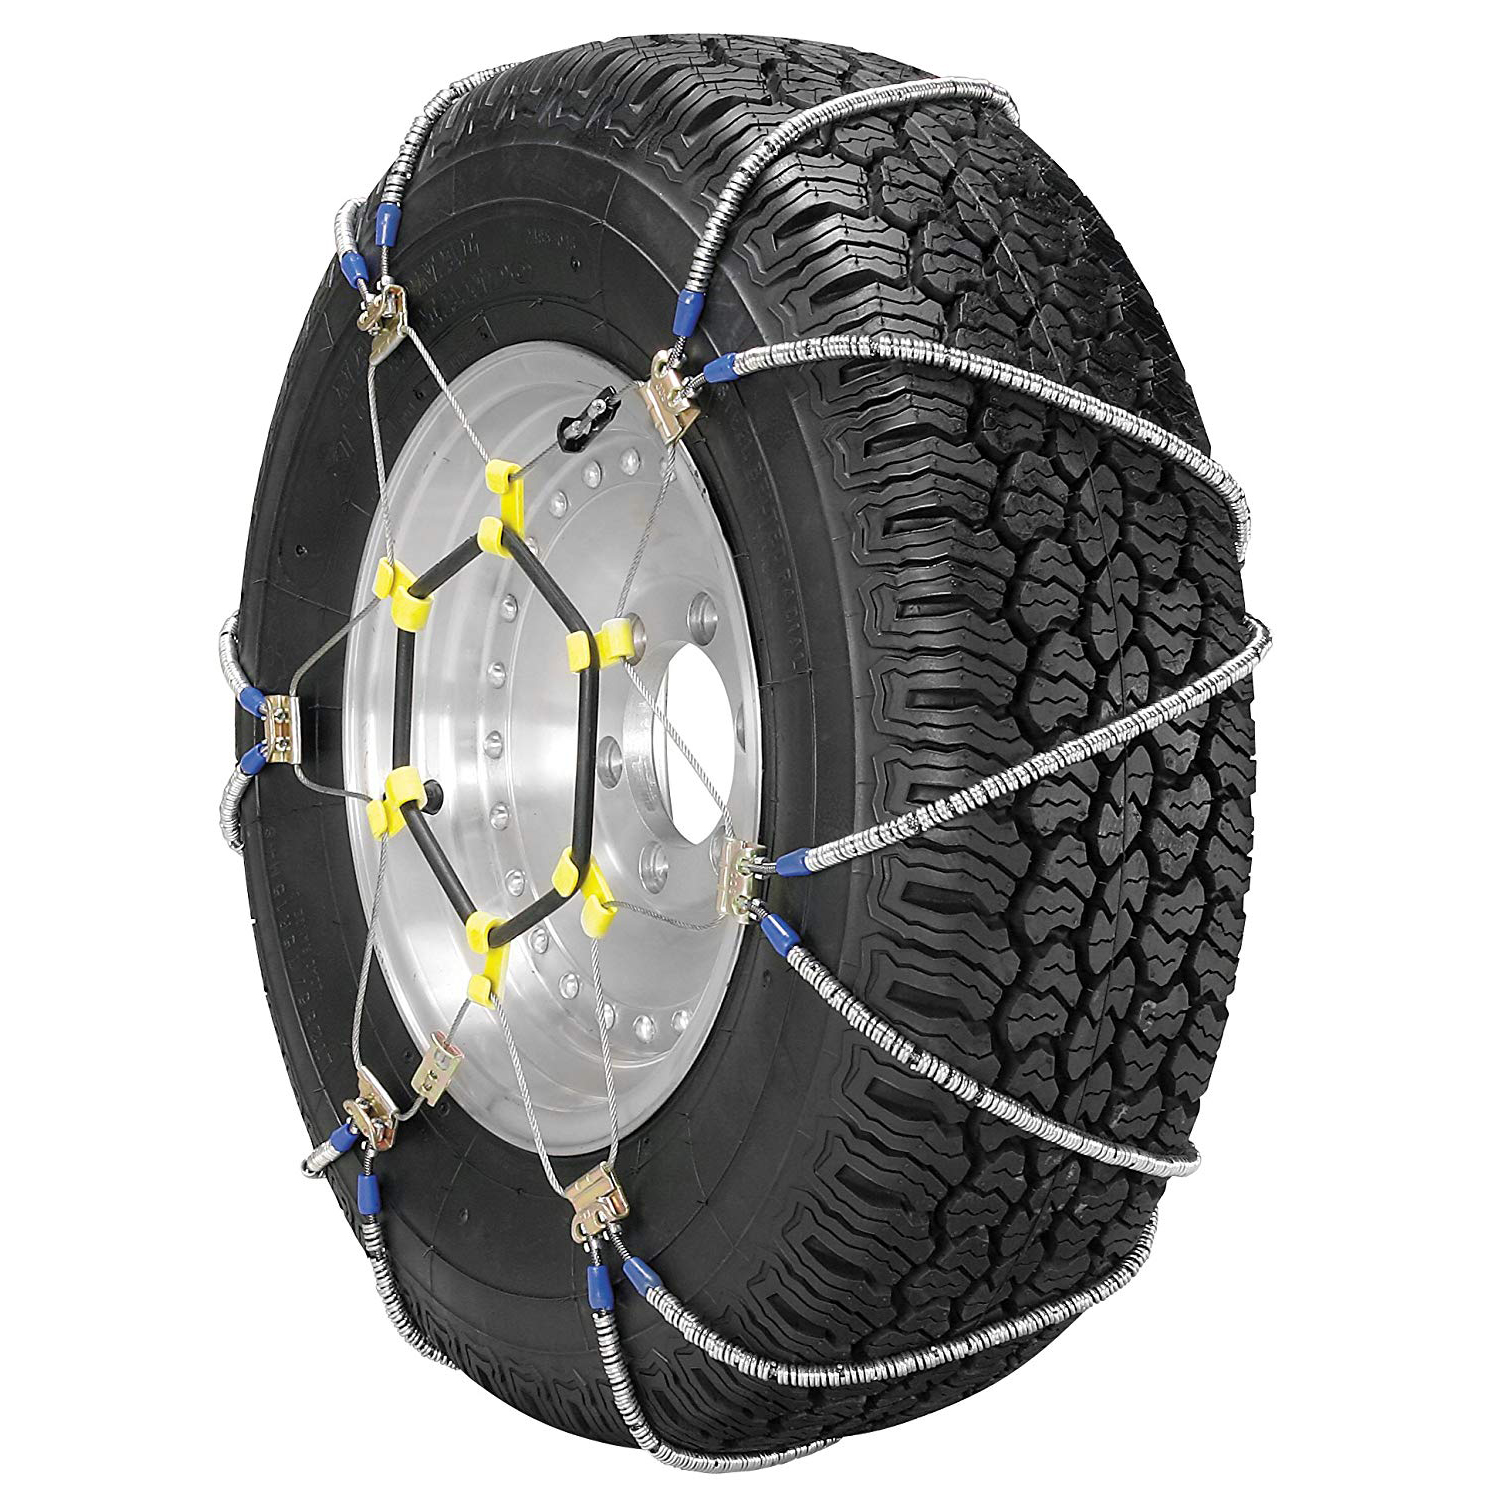 Security Chain ZT729 Super Z LT Truck SUV Snow Tire Radial Chain (2